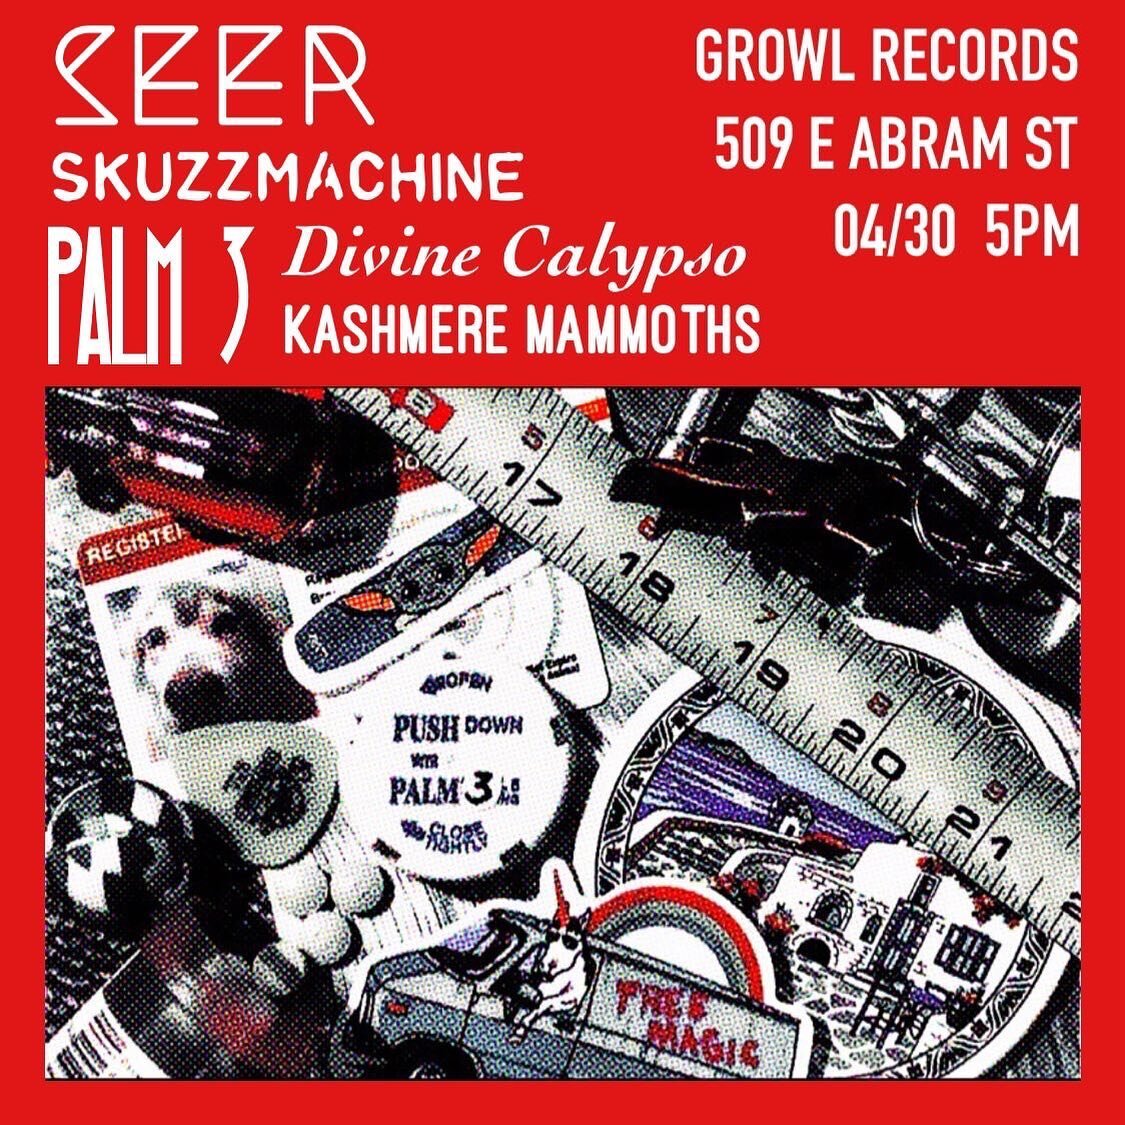 @growlrecords AT THE END OF THE MONTH COME SUPPORT THIS EVENT! 
04/30 2023 AT 5PM 509 E ABRAM ST.

ITS GONNA BE HEAVY @seerbandofficial IS HEADLINING 🔥🔥🔥

IF YOU HAVENT ALREADY STREAM THEIR ALBUM RED SORCERESS AVAILABLE ON ALL STREAMING PLATFORMS!